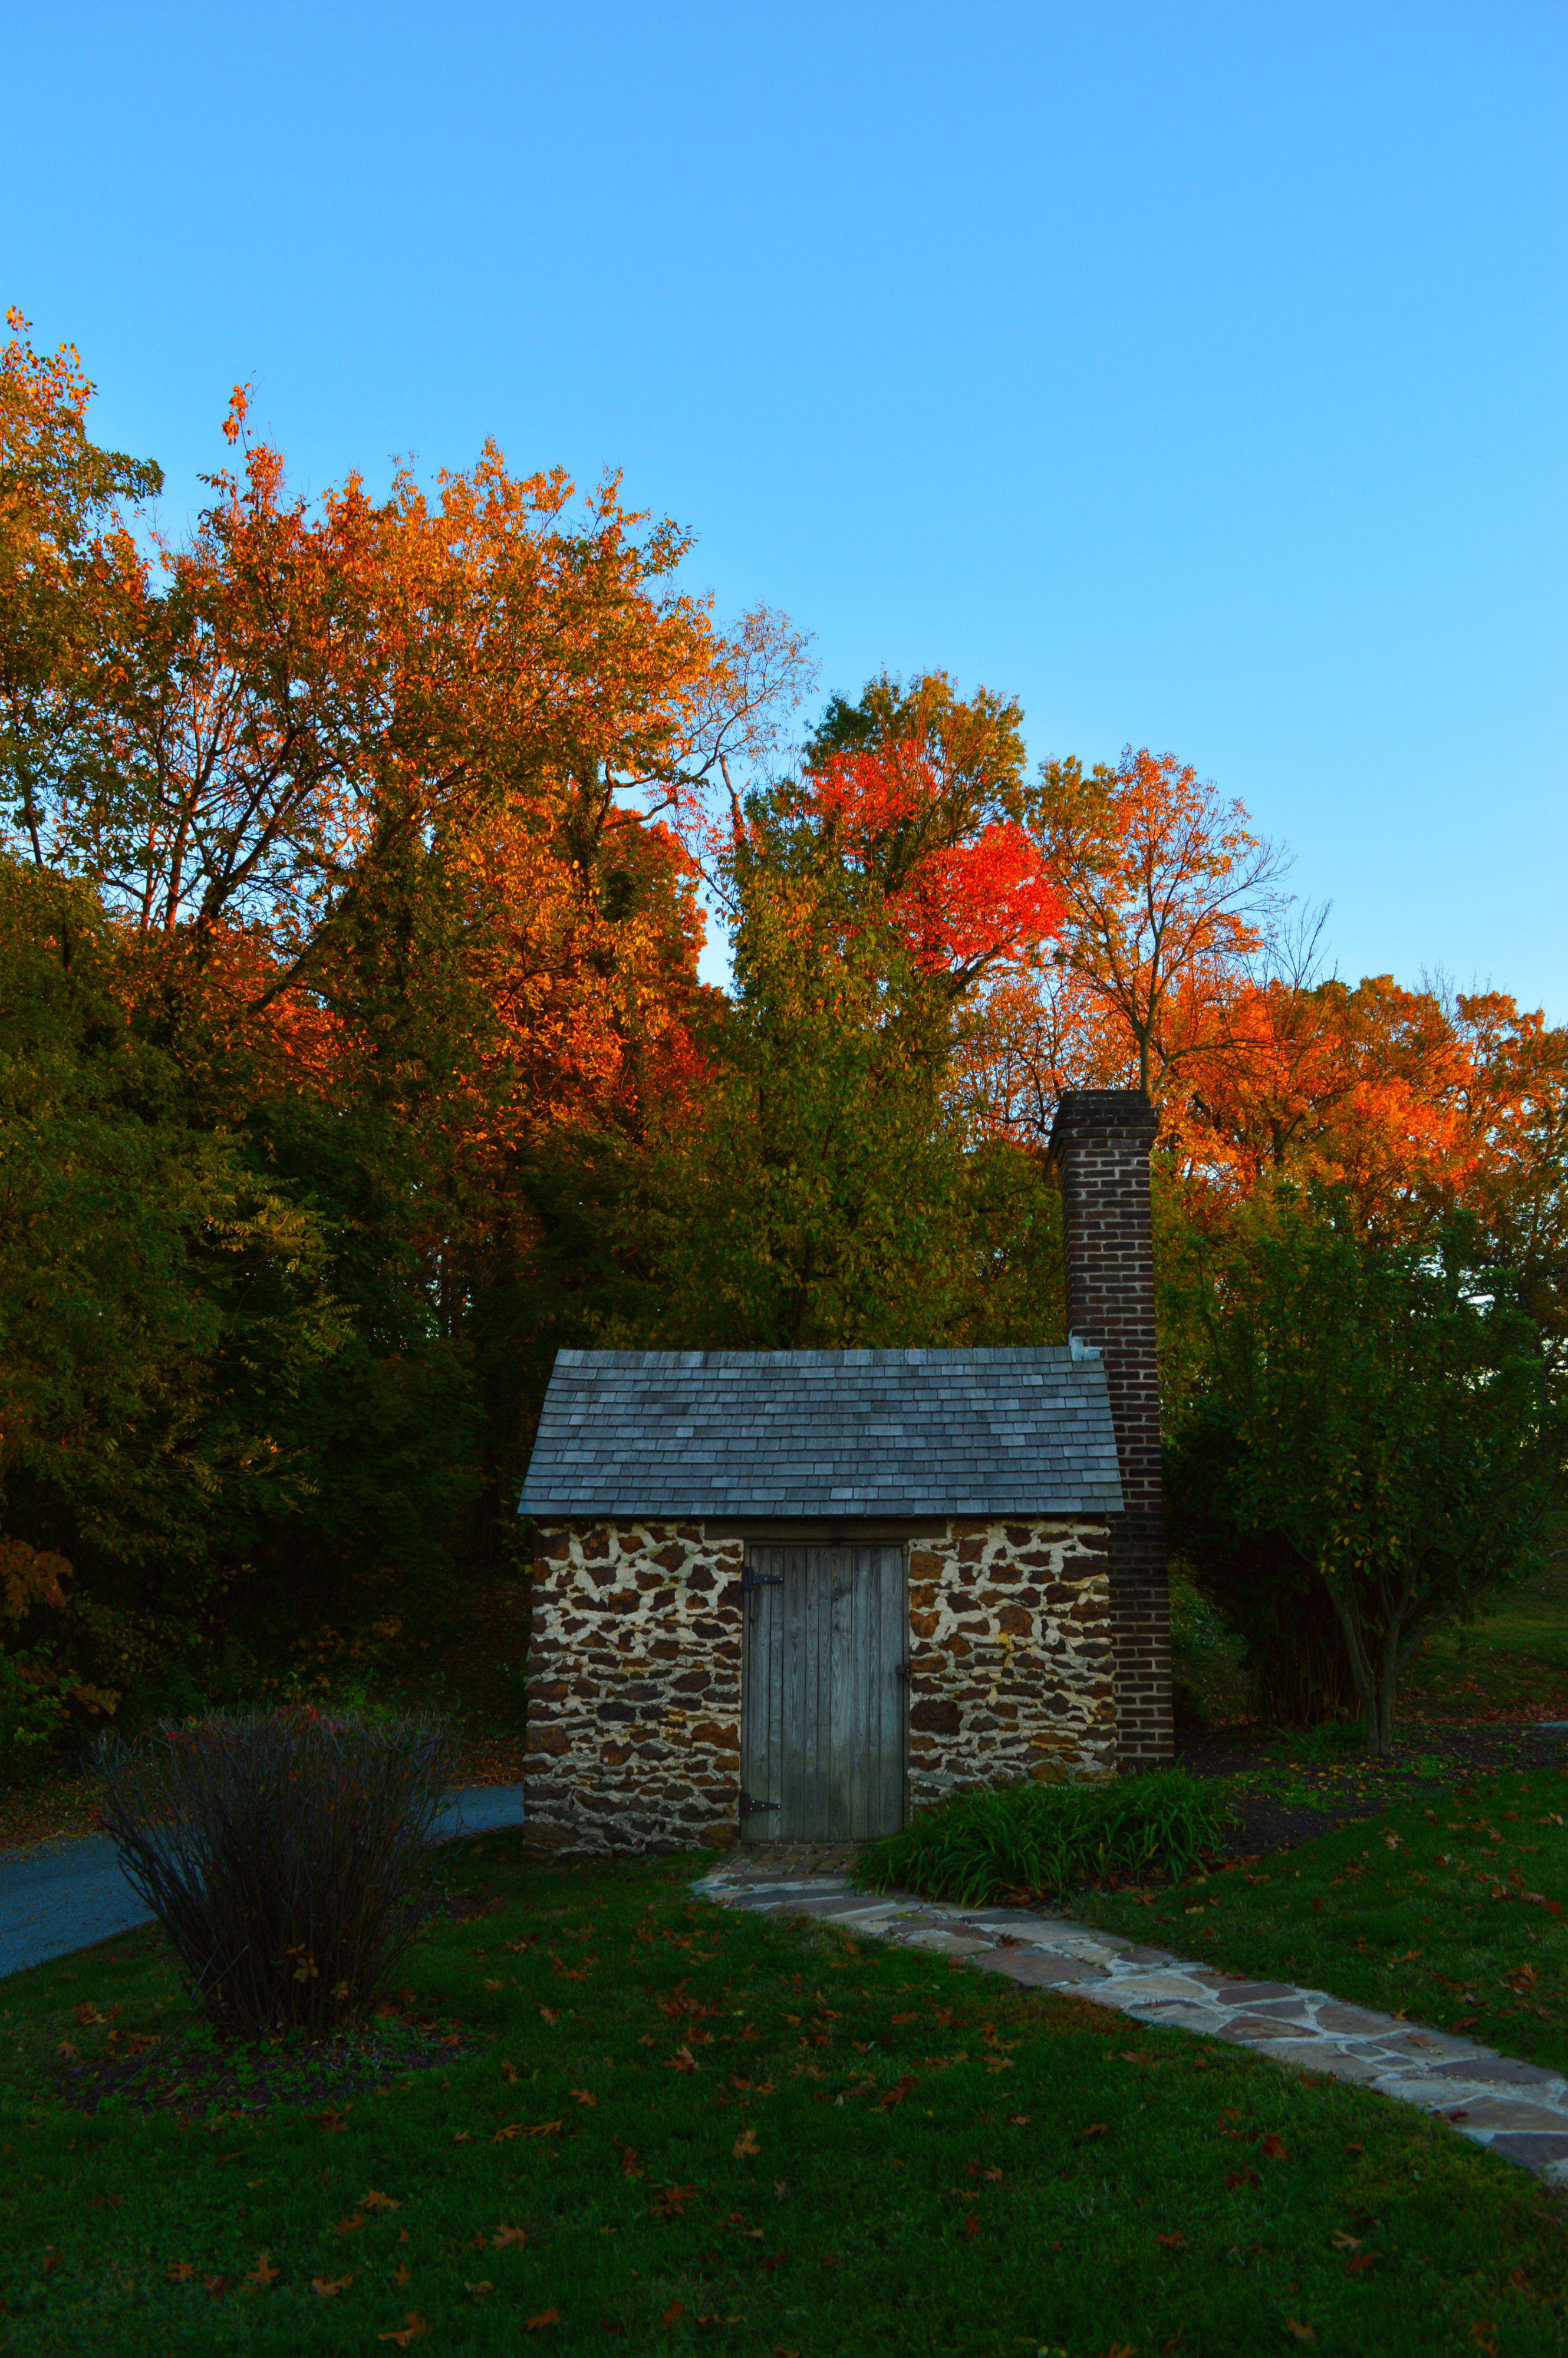 A tiny stone cabin surrounded by fall foliage